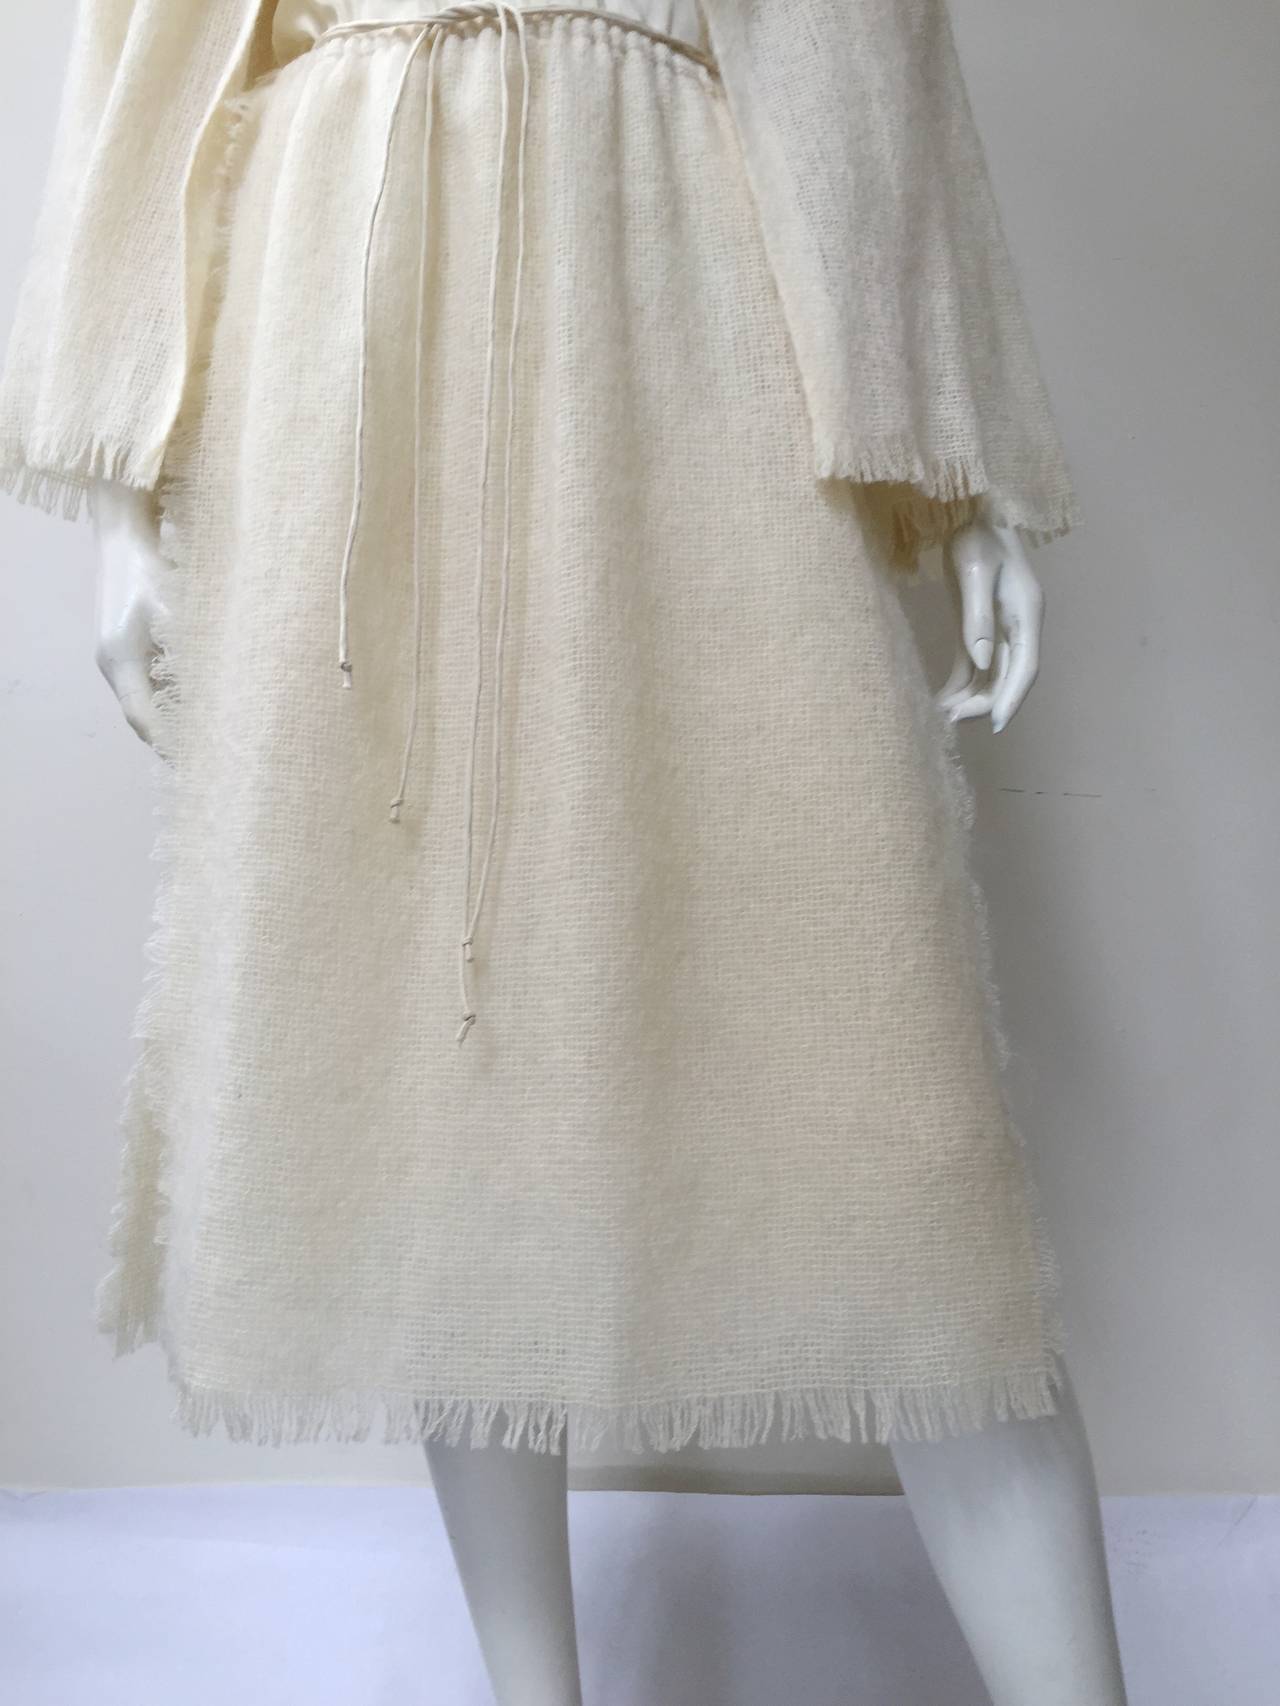 Beige Fiandaca Couturier Silk / Mohair Dress with Jacket Size 6. For Sale